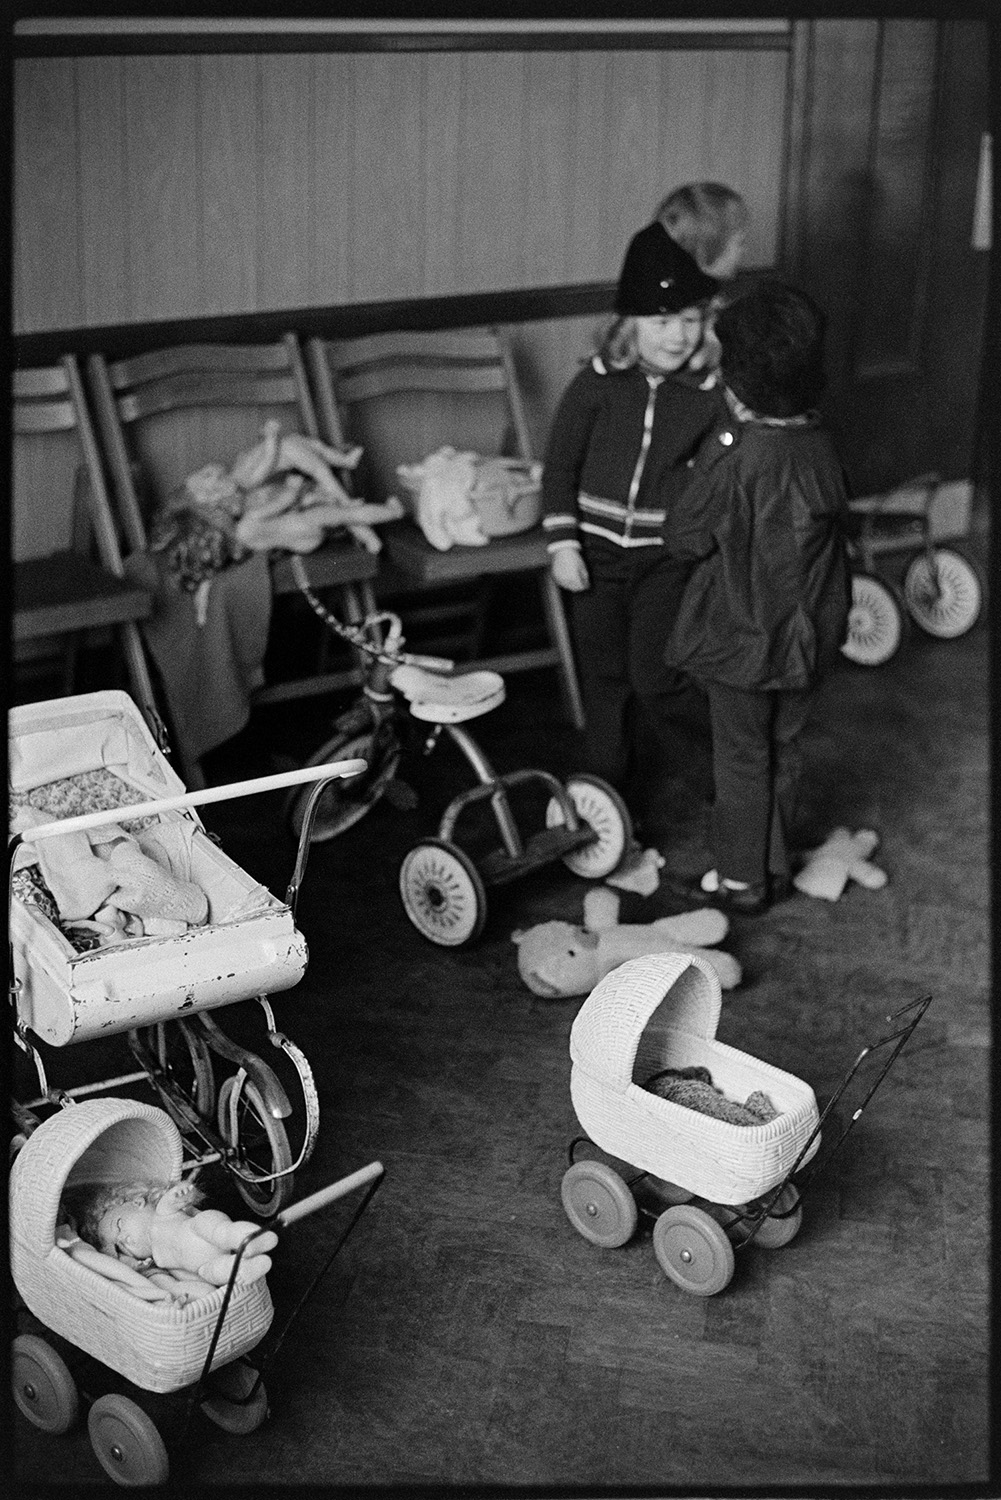 Play group toys, prams, tricycle.
[Children at a play group in Dolton Village Hall, playing with dolls, toy prams and a tricycle.]